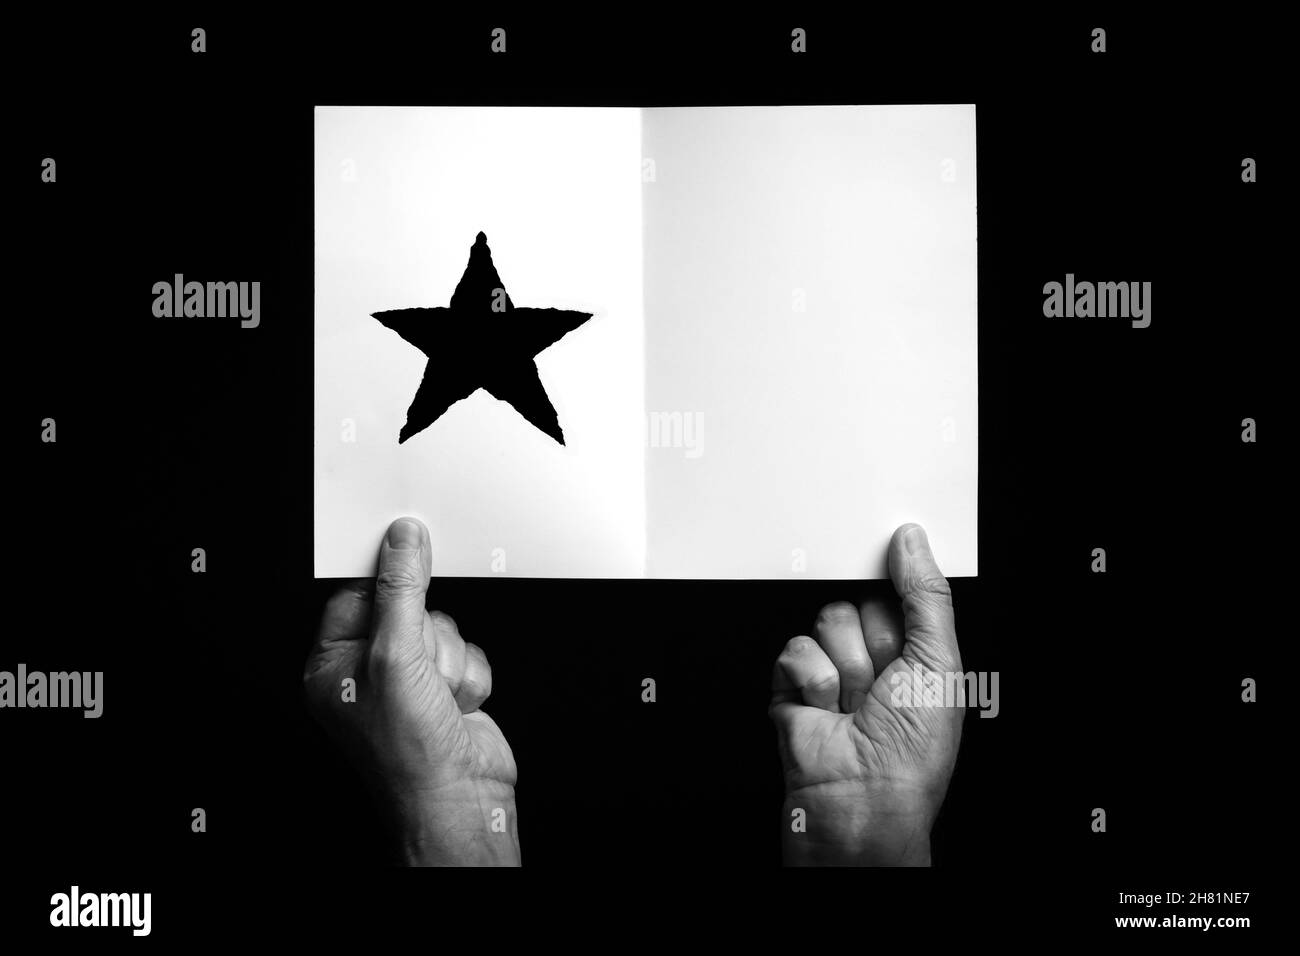 B+W image of male hands holding folded card with christmas star symbol against black background. Stock Photo